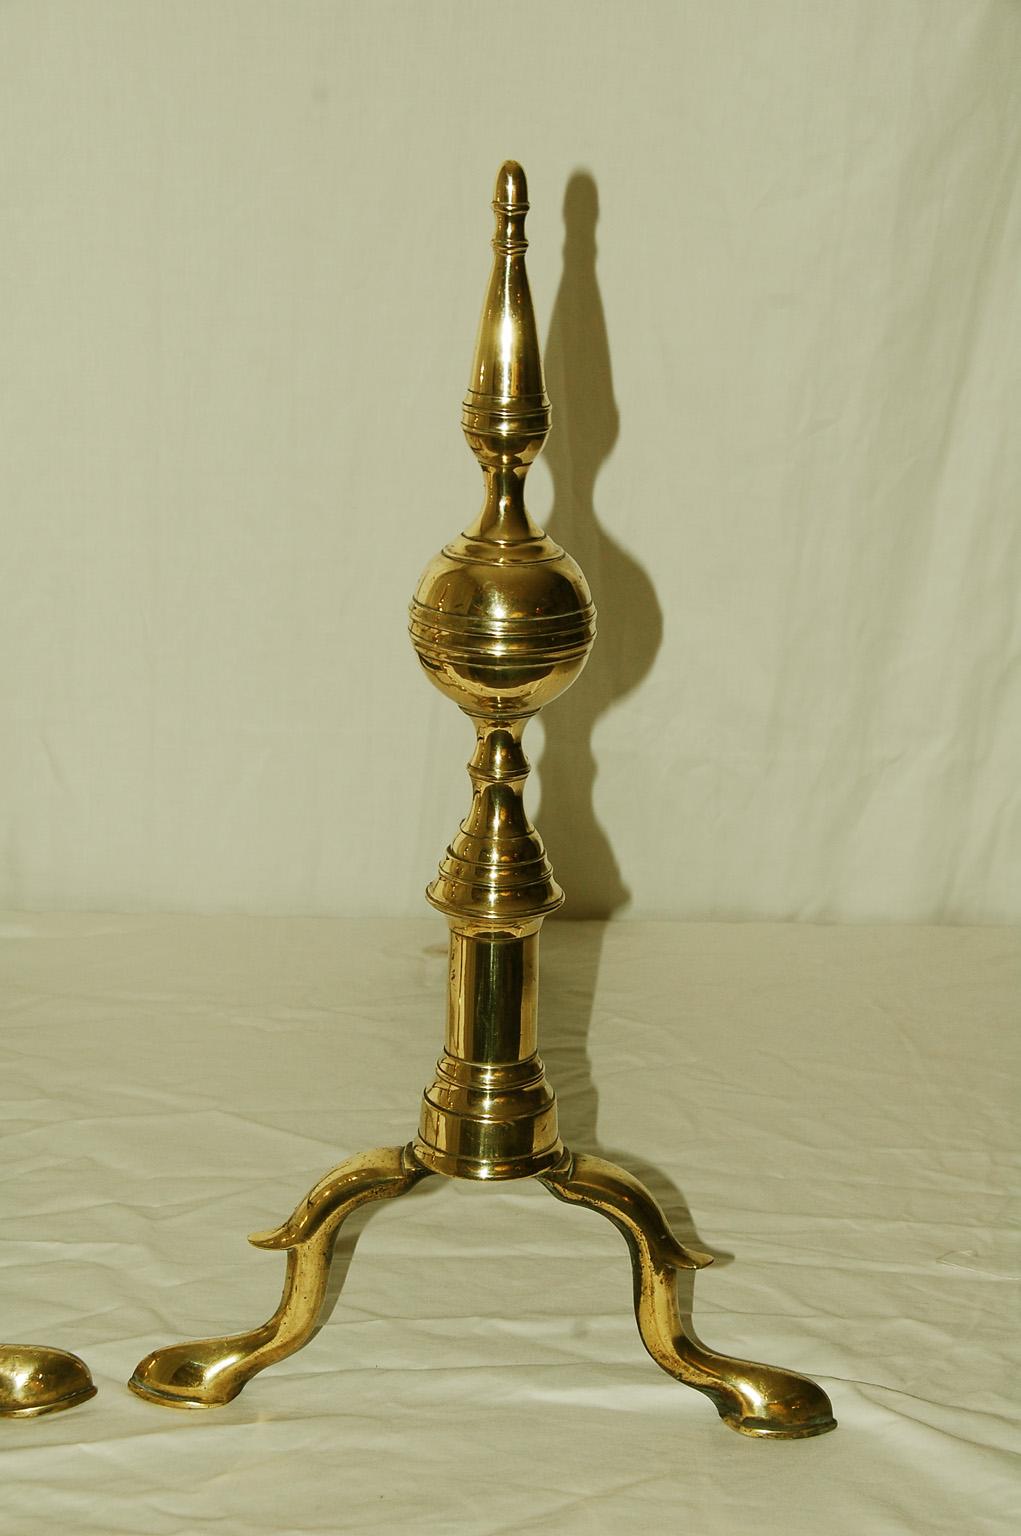 American Federal period brass ball and steeple top andirons. The belted balls are surmounted by a spire that adds height and elegance to these early 19th century andirons. The belted ball and spire are supported by a round column that sits upon